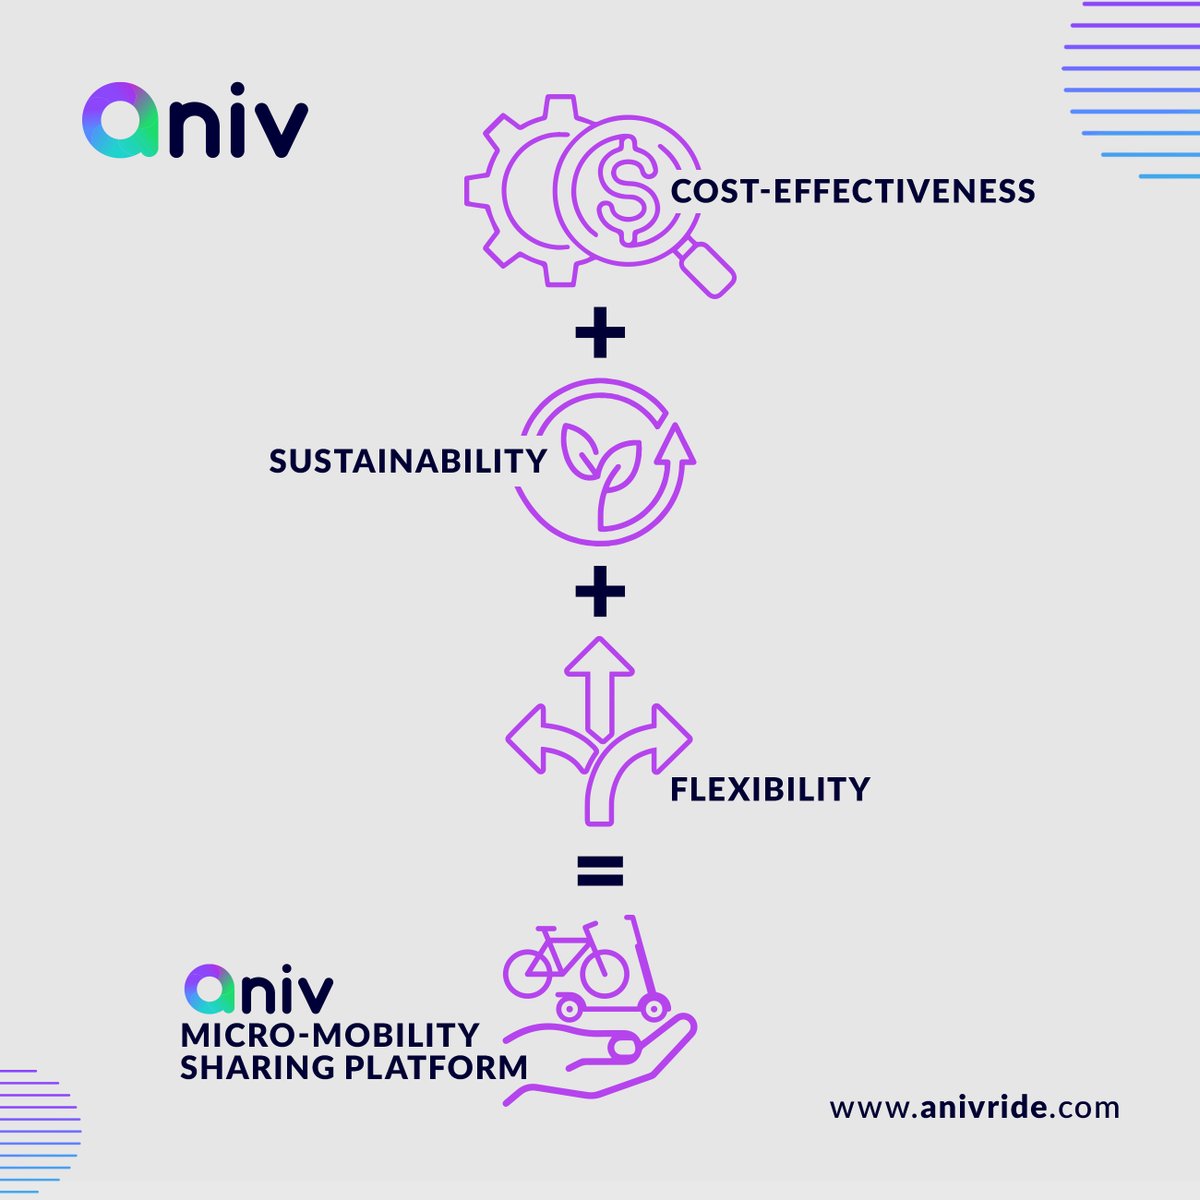 🙌Scale your micro-mobility network, efficiently manage the fleet and generate income from the rides and the advertisement with only one app!
ANIV - your micro-mobility business is in your hands!💯

#micromobilitysharing #sharingapp